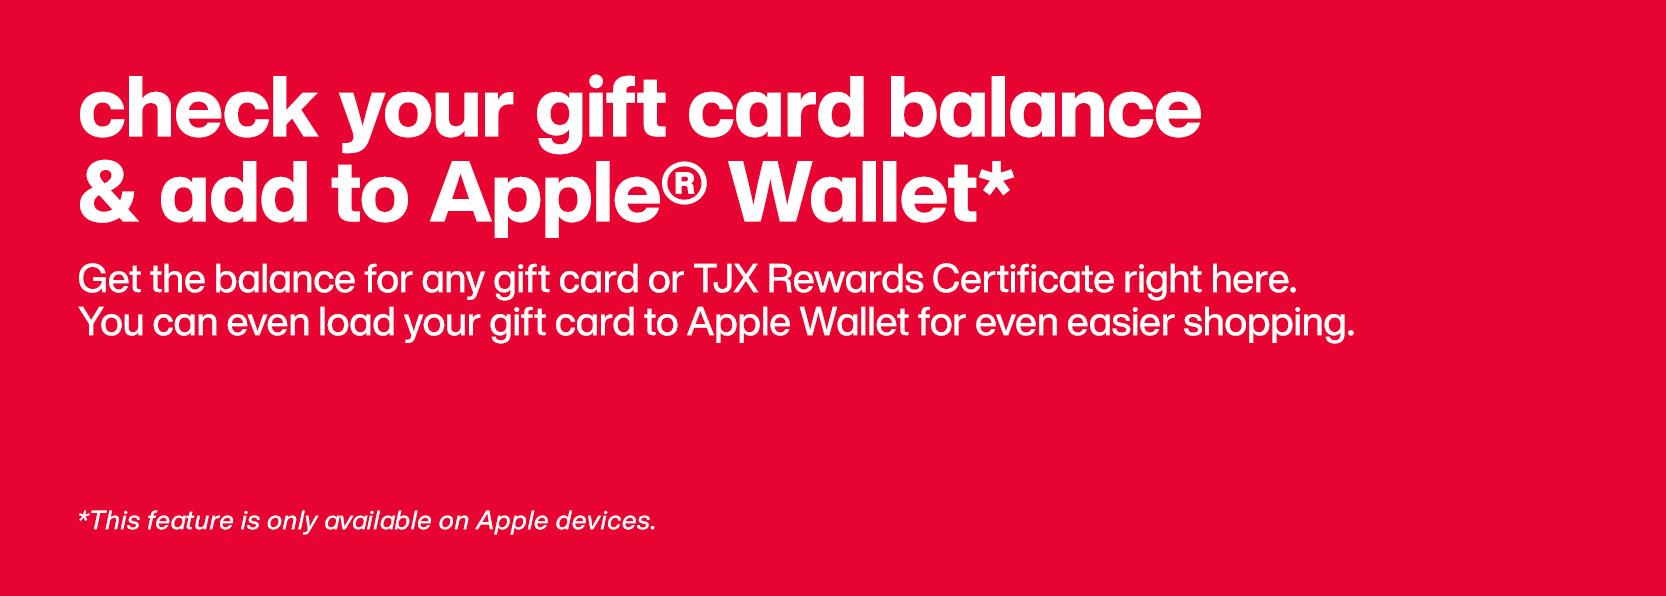 Check your gift card balance and add to Apple Wallet.* Get the balance for any gift card or TJX Rewards Certificate right here. You can even load your gift card to Apple Wallet for even easier shopping. *This feature is only available on Apple devices.